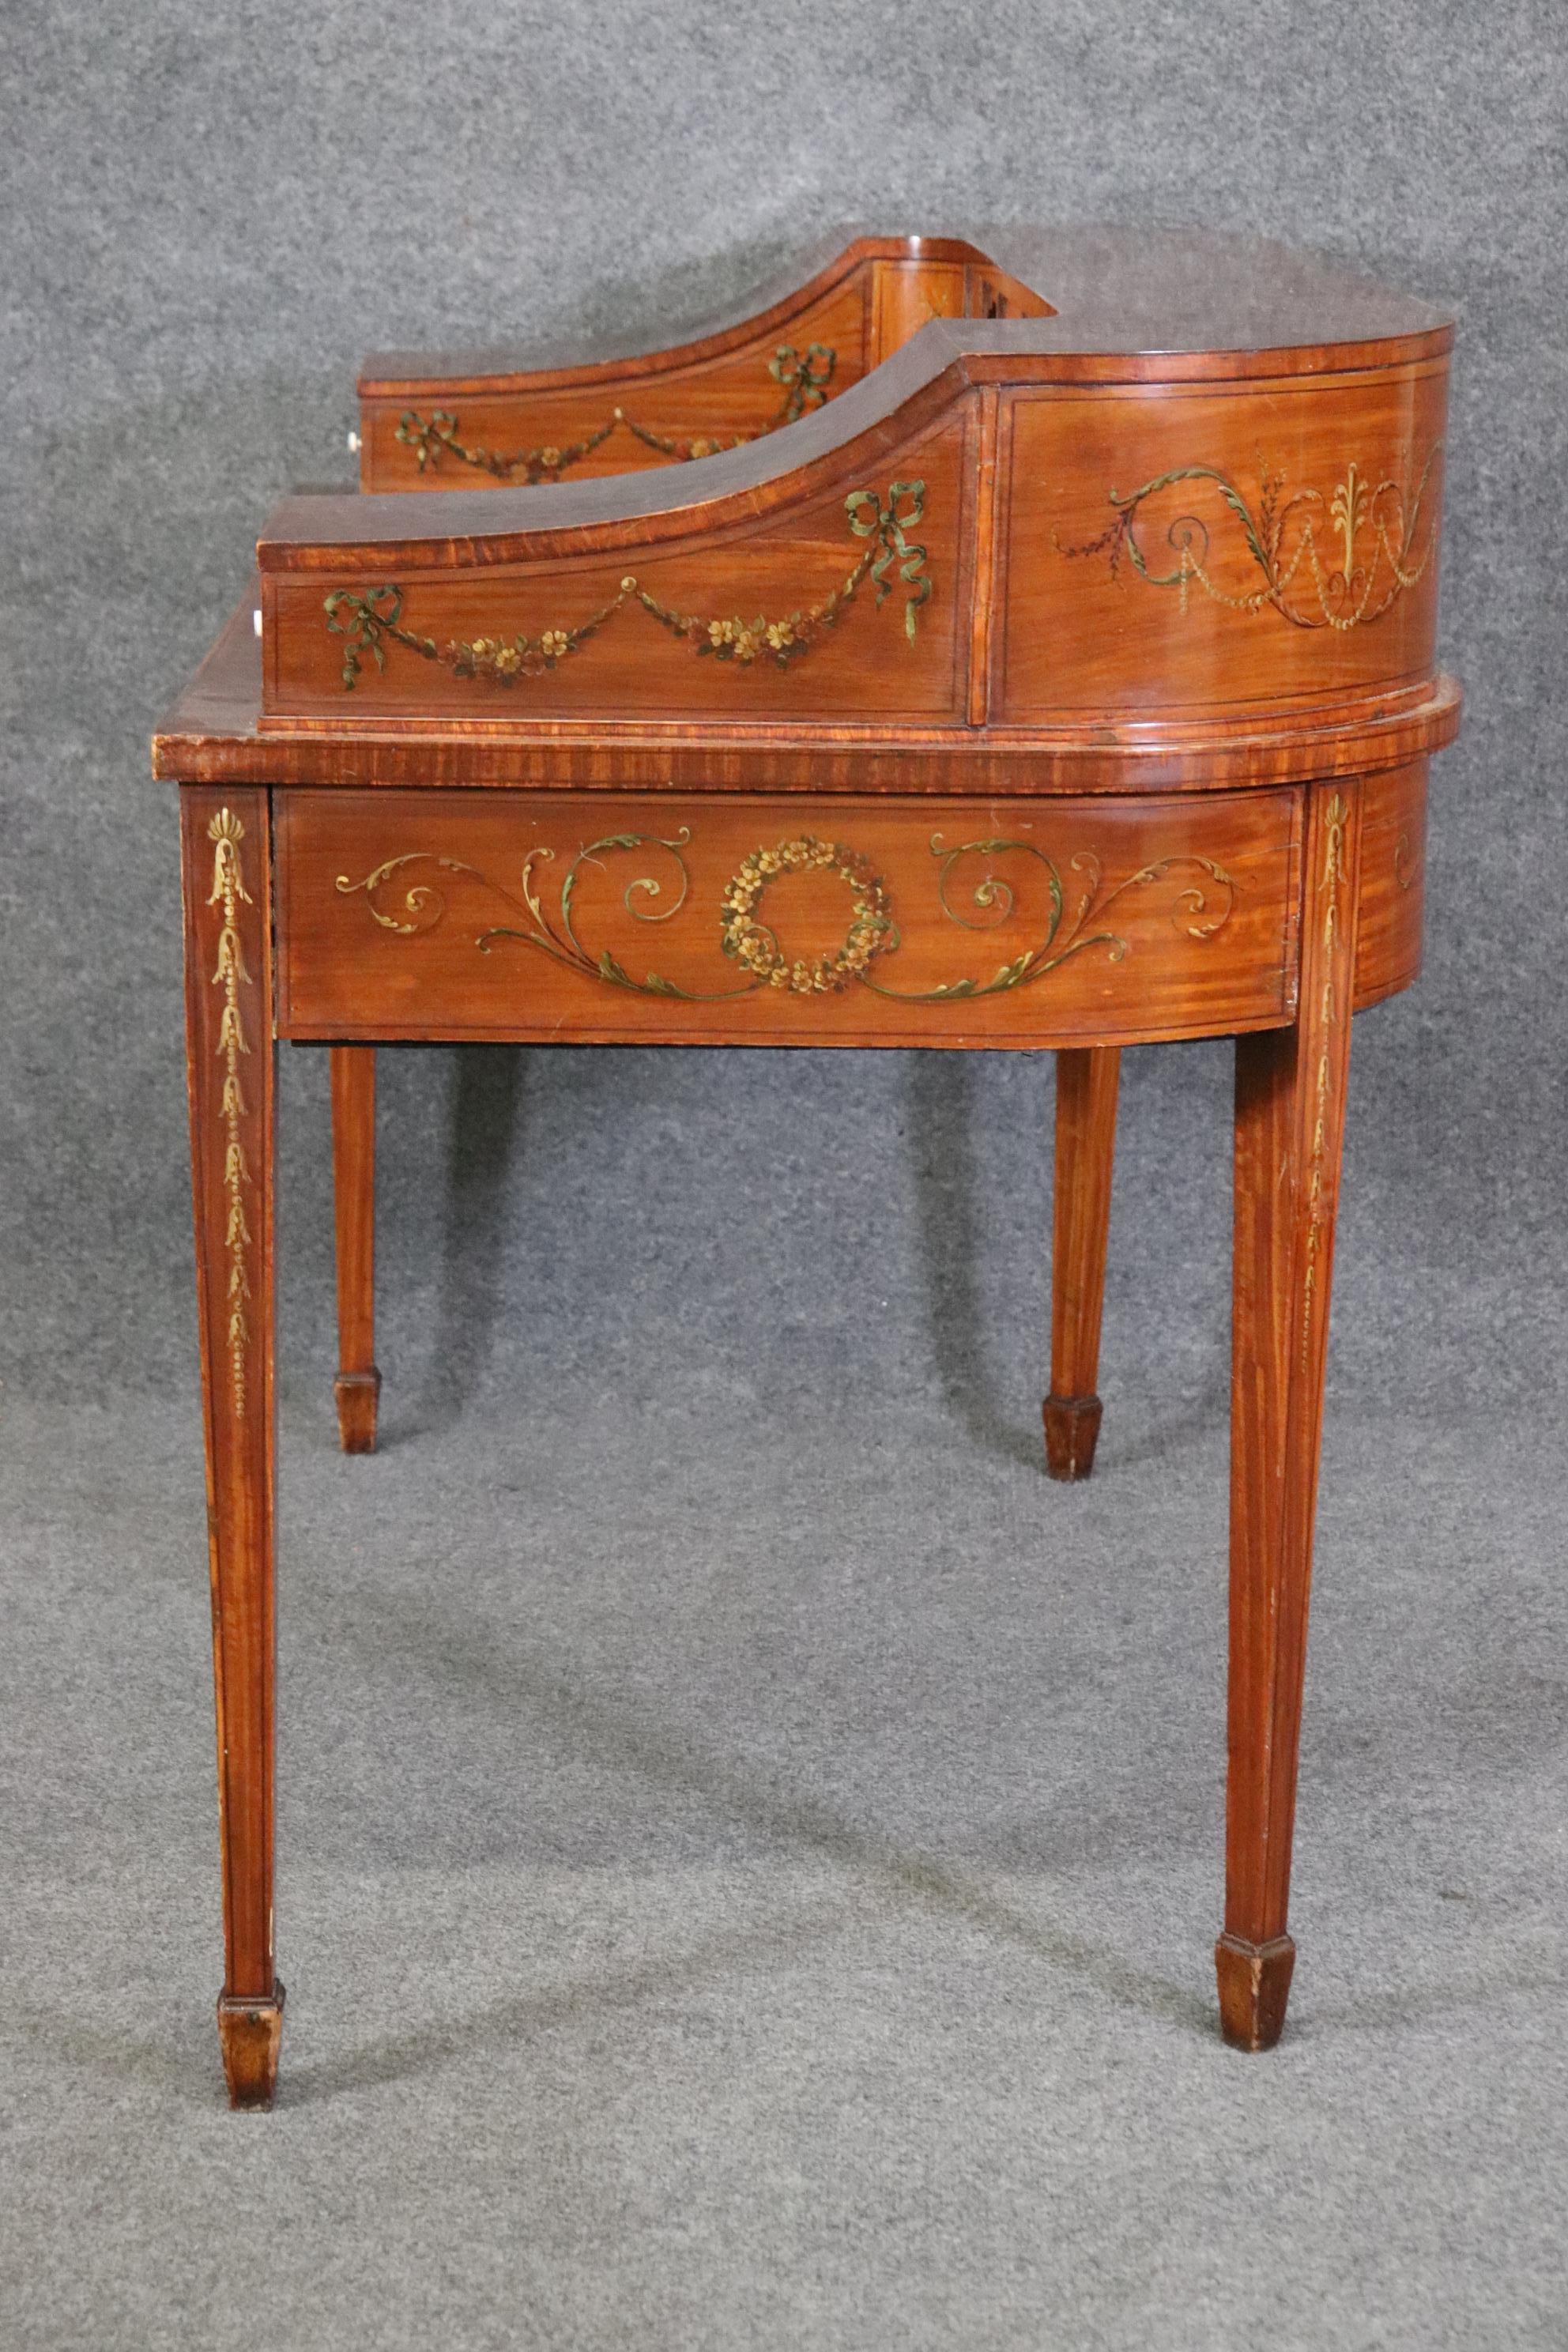 Fine Quality English Satinwood Carlton House Desk with Cherubs and Musical Theme For Sale 3